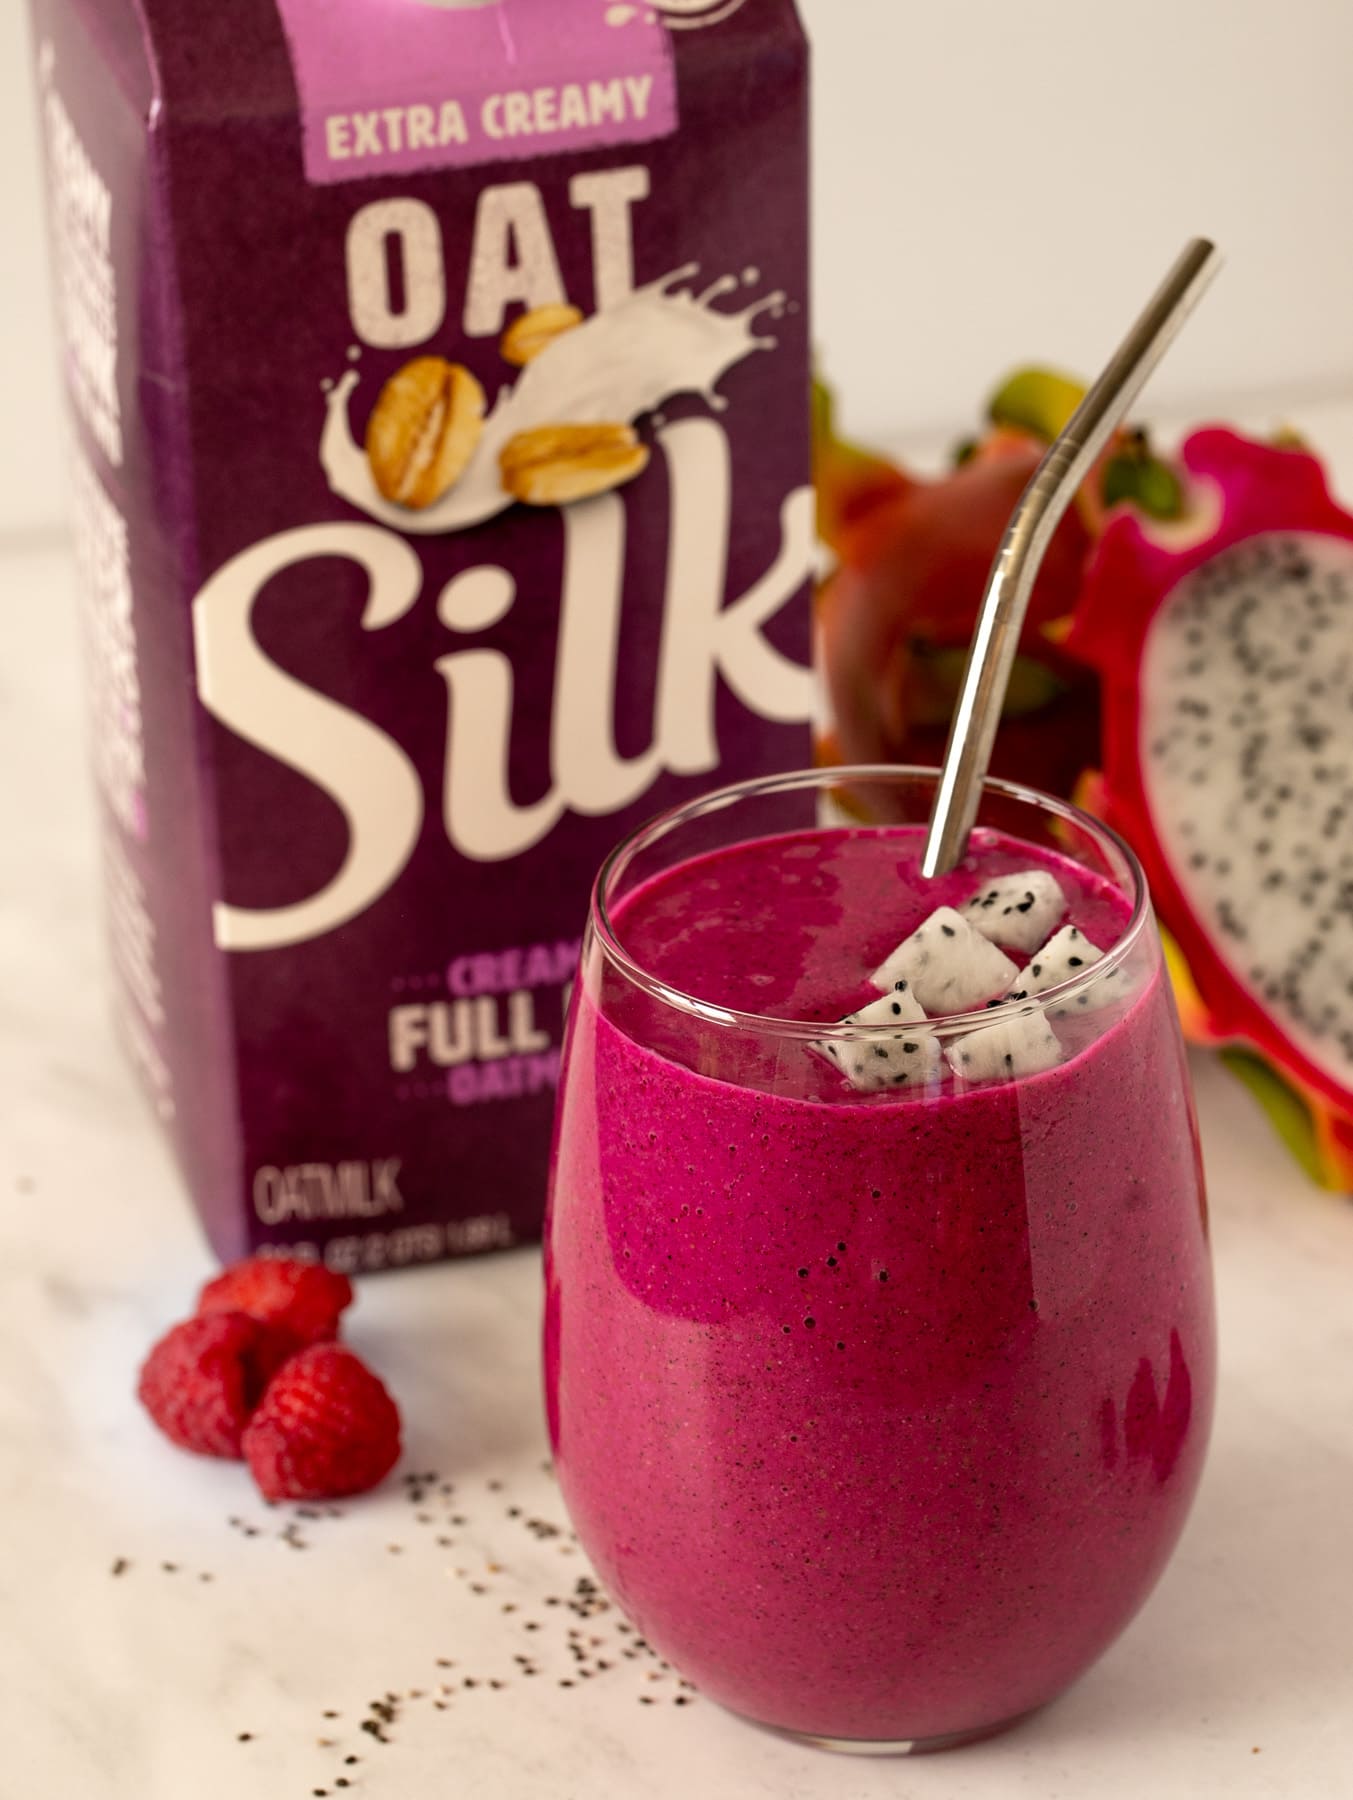 Dragon fruit smoothie in a glass with silver straw and Silk Oatmilk